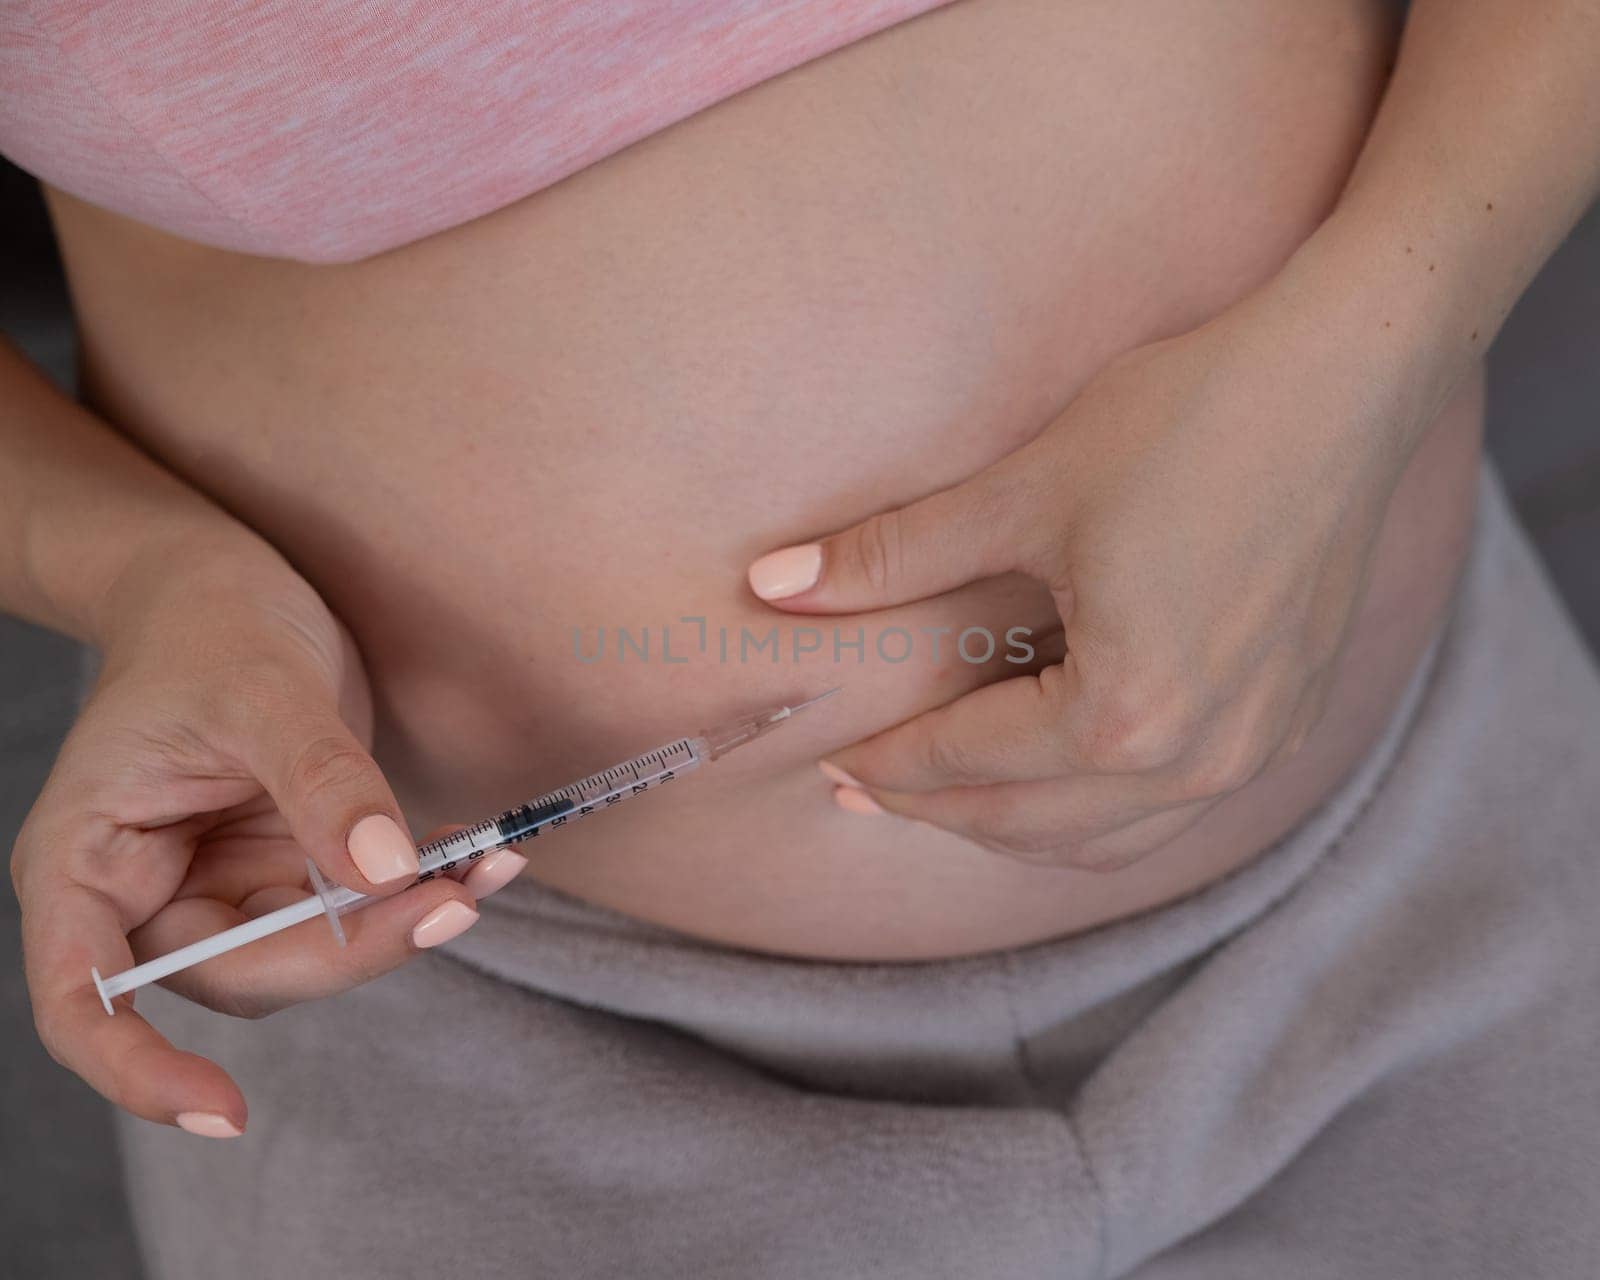 A pregnant woman puts an injection of insulin while sitting on the couch. Close up of the belly. by mrwed54